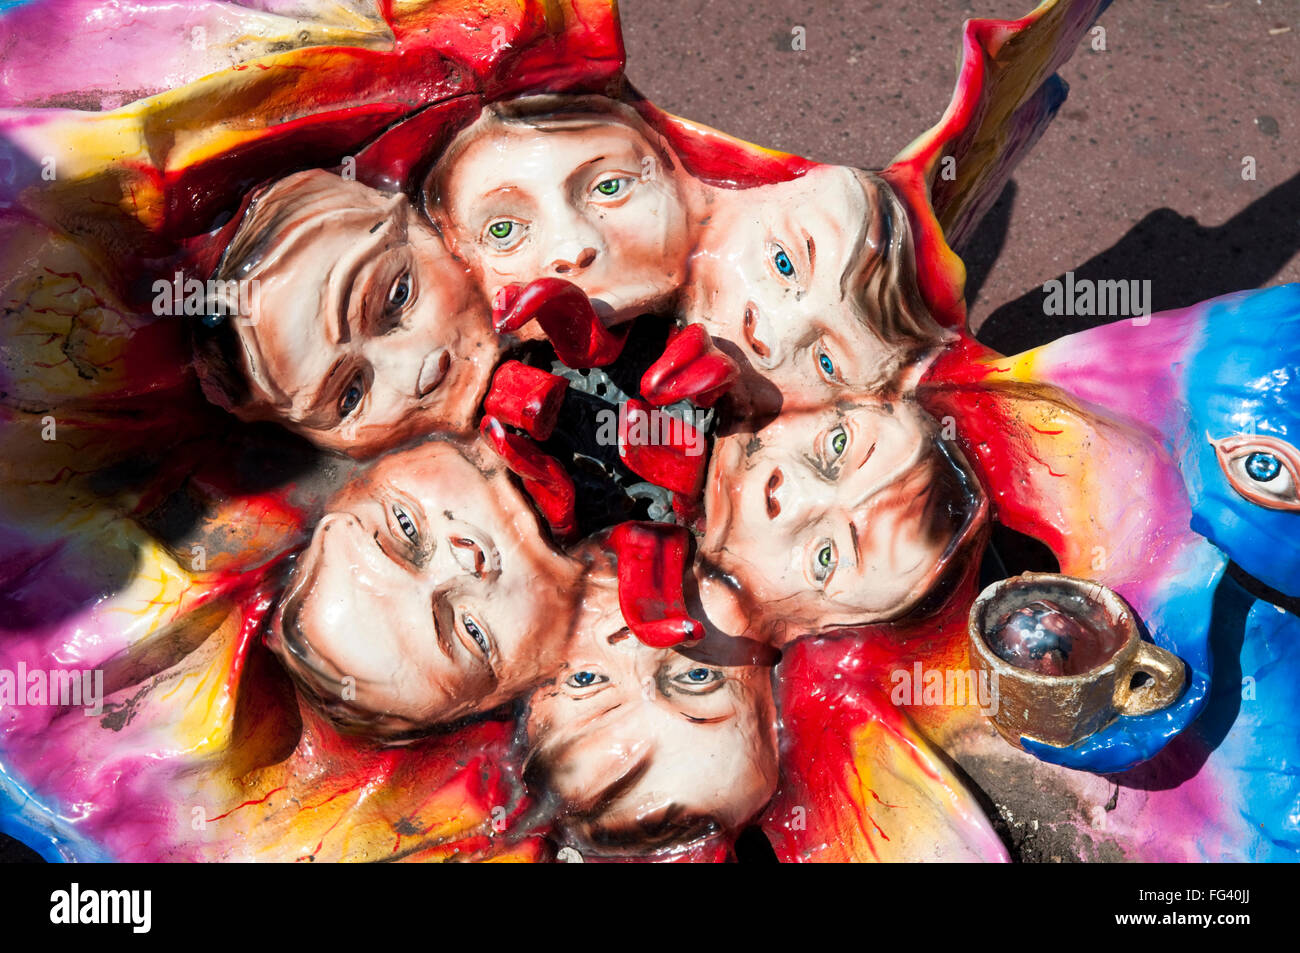 Bizarre sculpture of heads with long red tongues at the Prater amusement park in Vienna Stock Photo